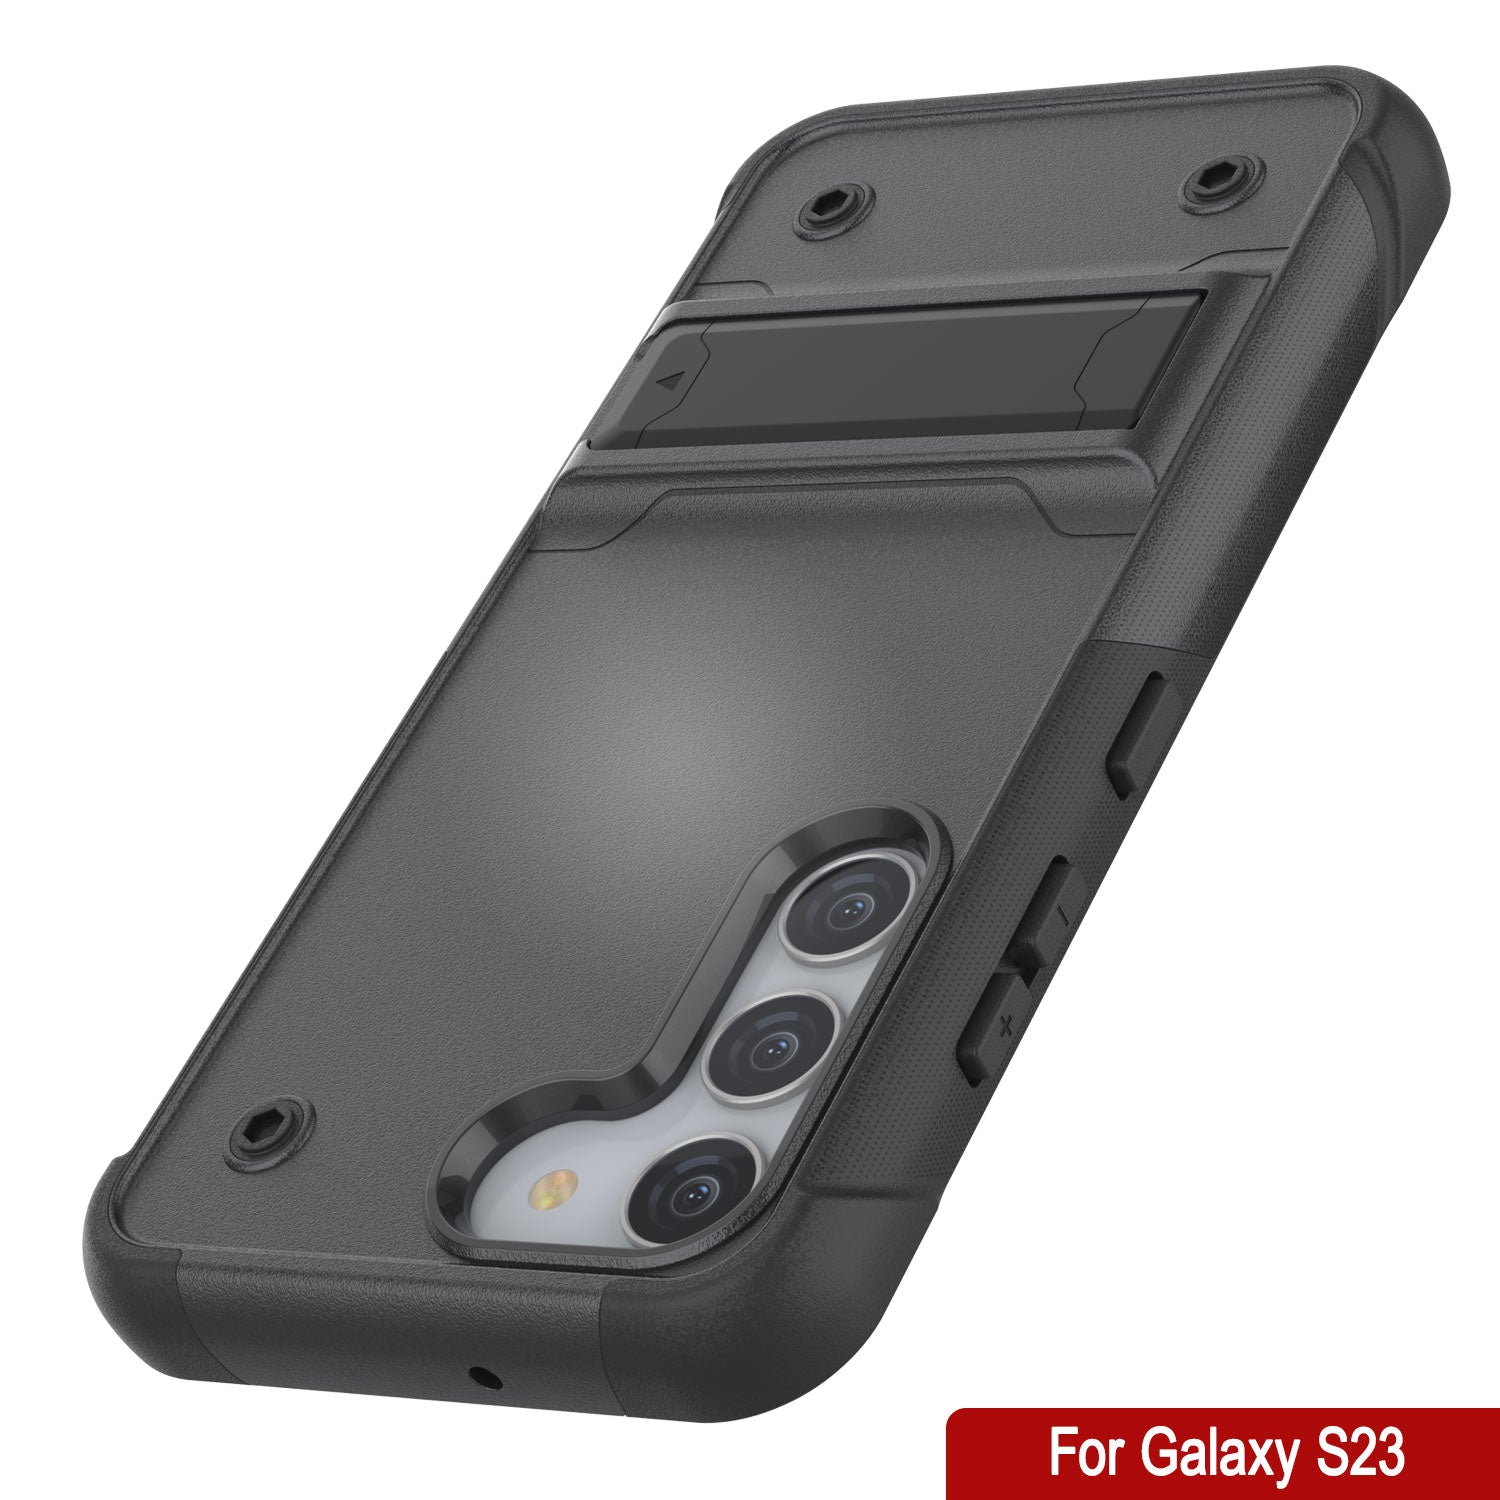 Punkcase Galaxy S24 Case [Reliance Series] Protective Hybrid Military Grade Cover W/Built-in Kickstand [Grey-Black]